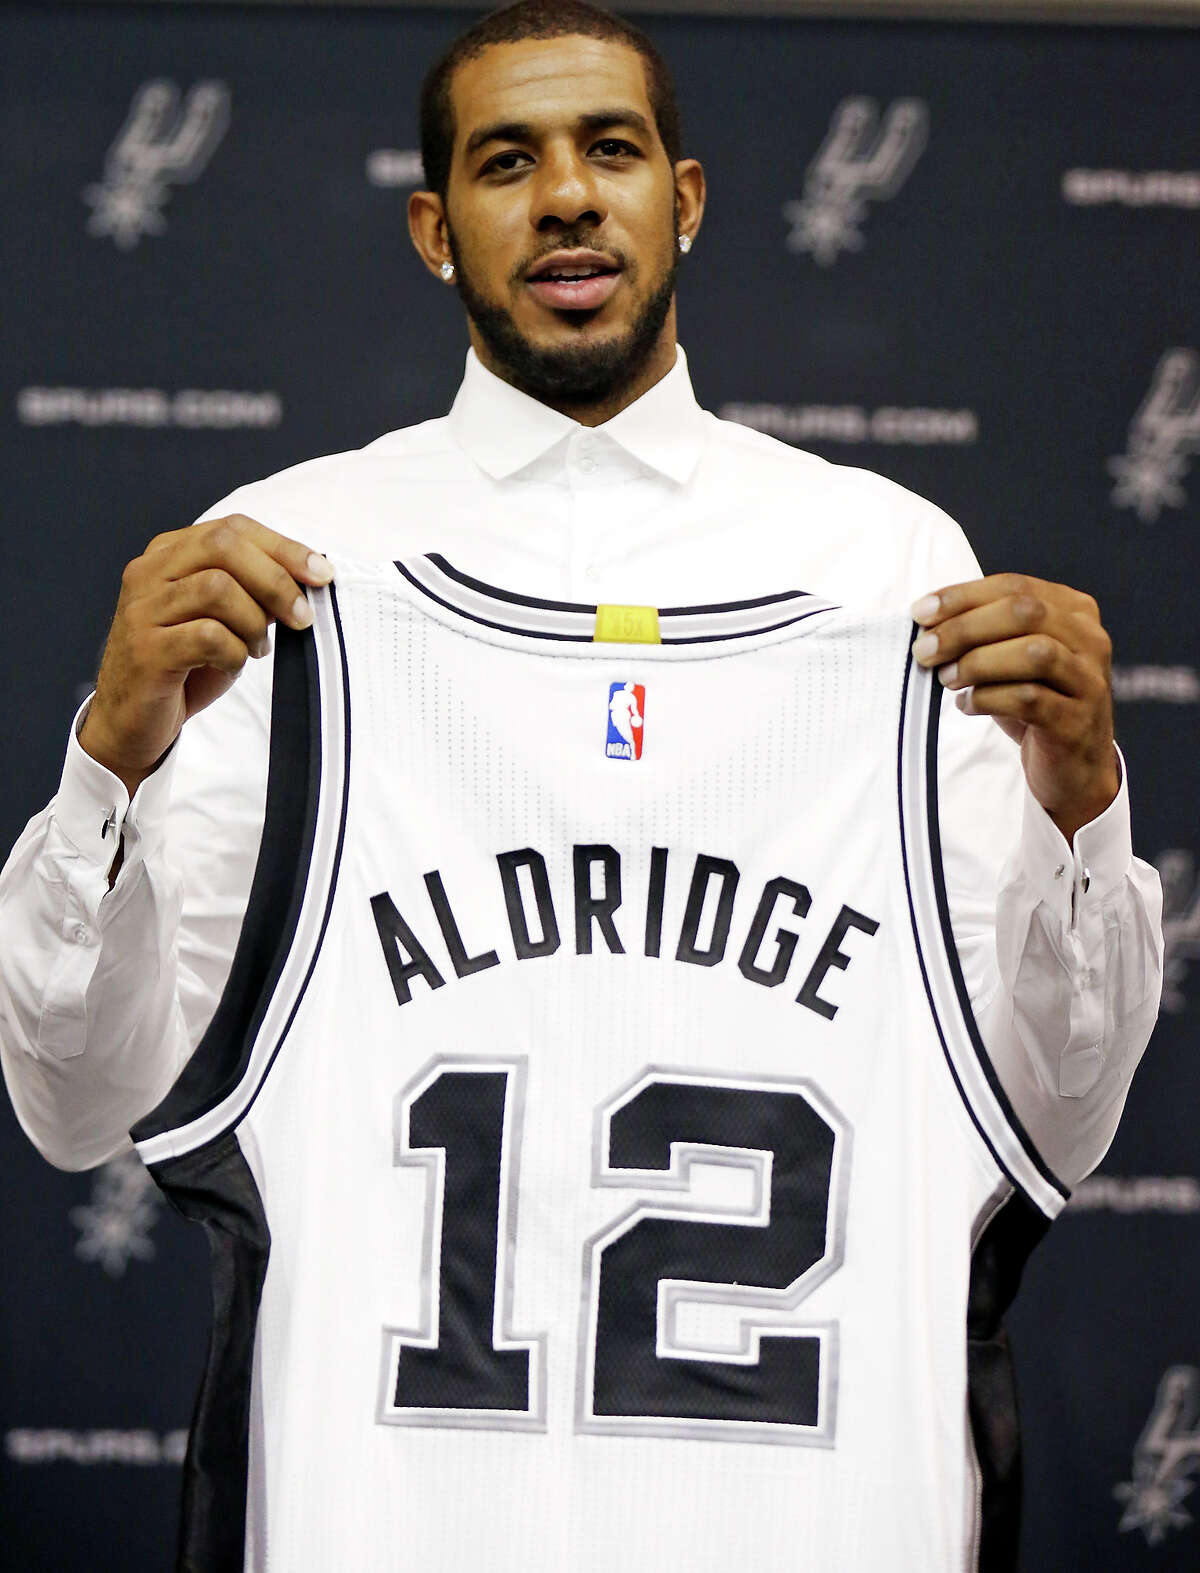 San Antonio Spurs' LaMarcus Aldridge poses for photos with his jersey during a press conference at the Spurs practice facility Friday July 10, 2015 where he was officially introduced.